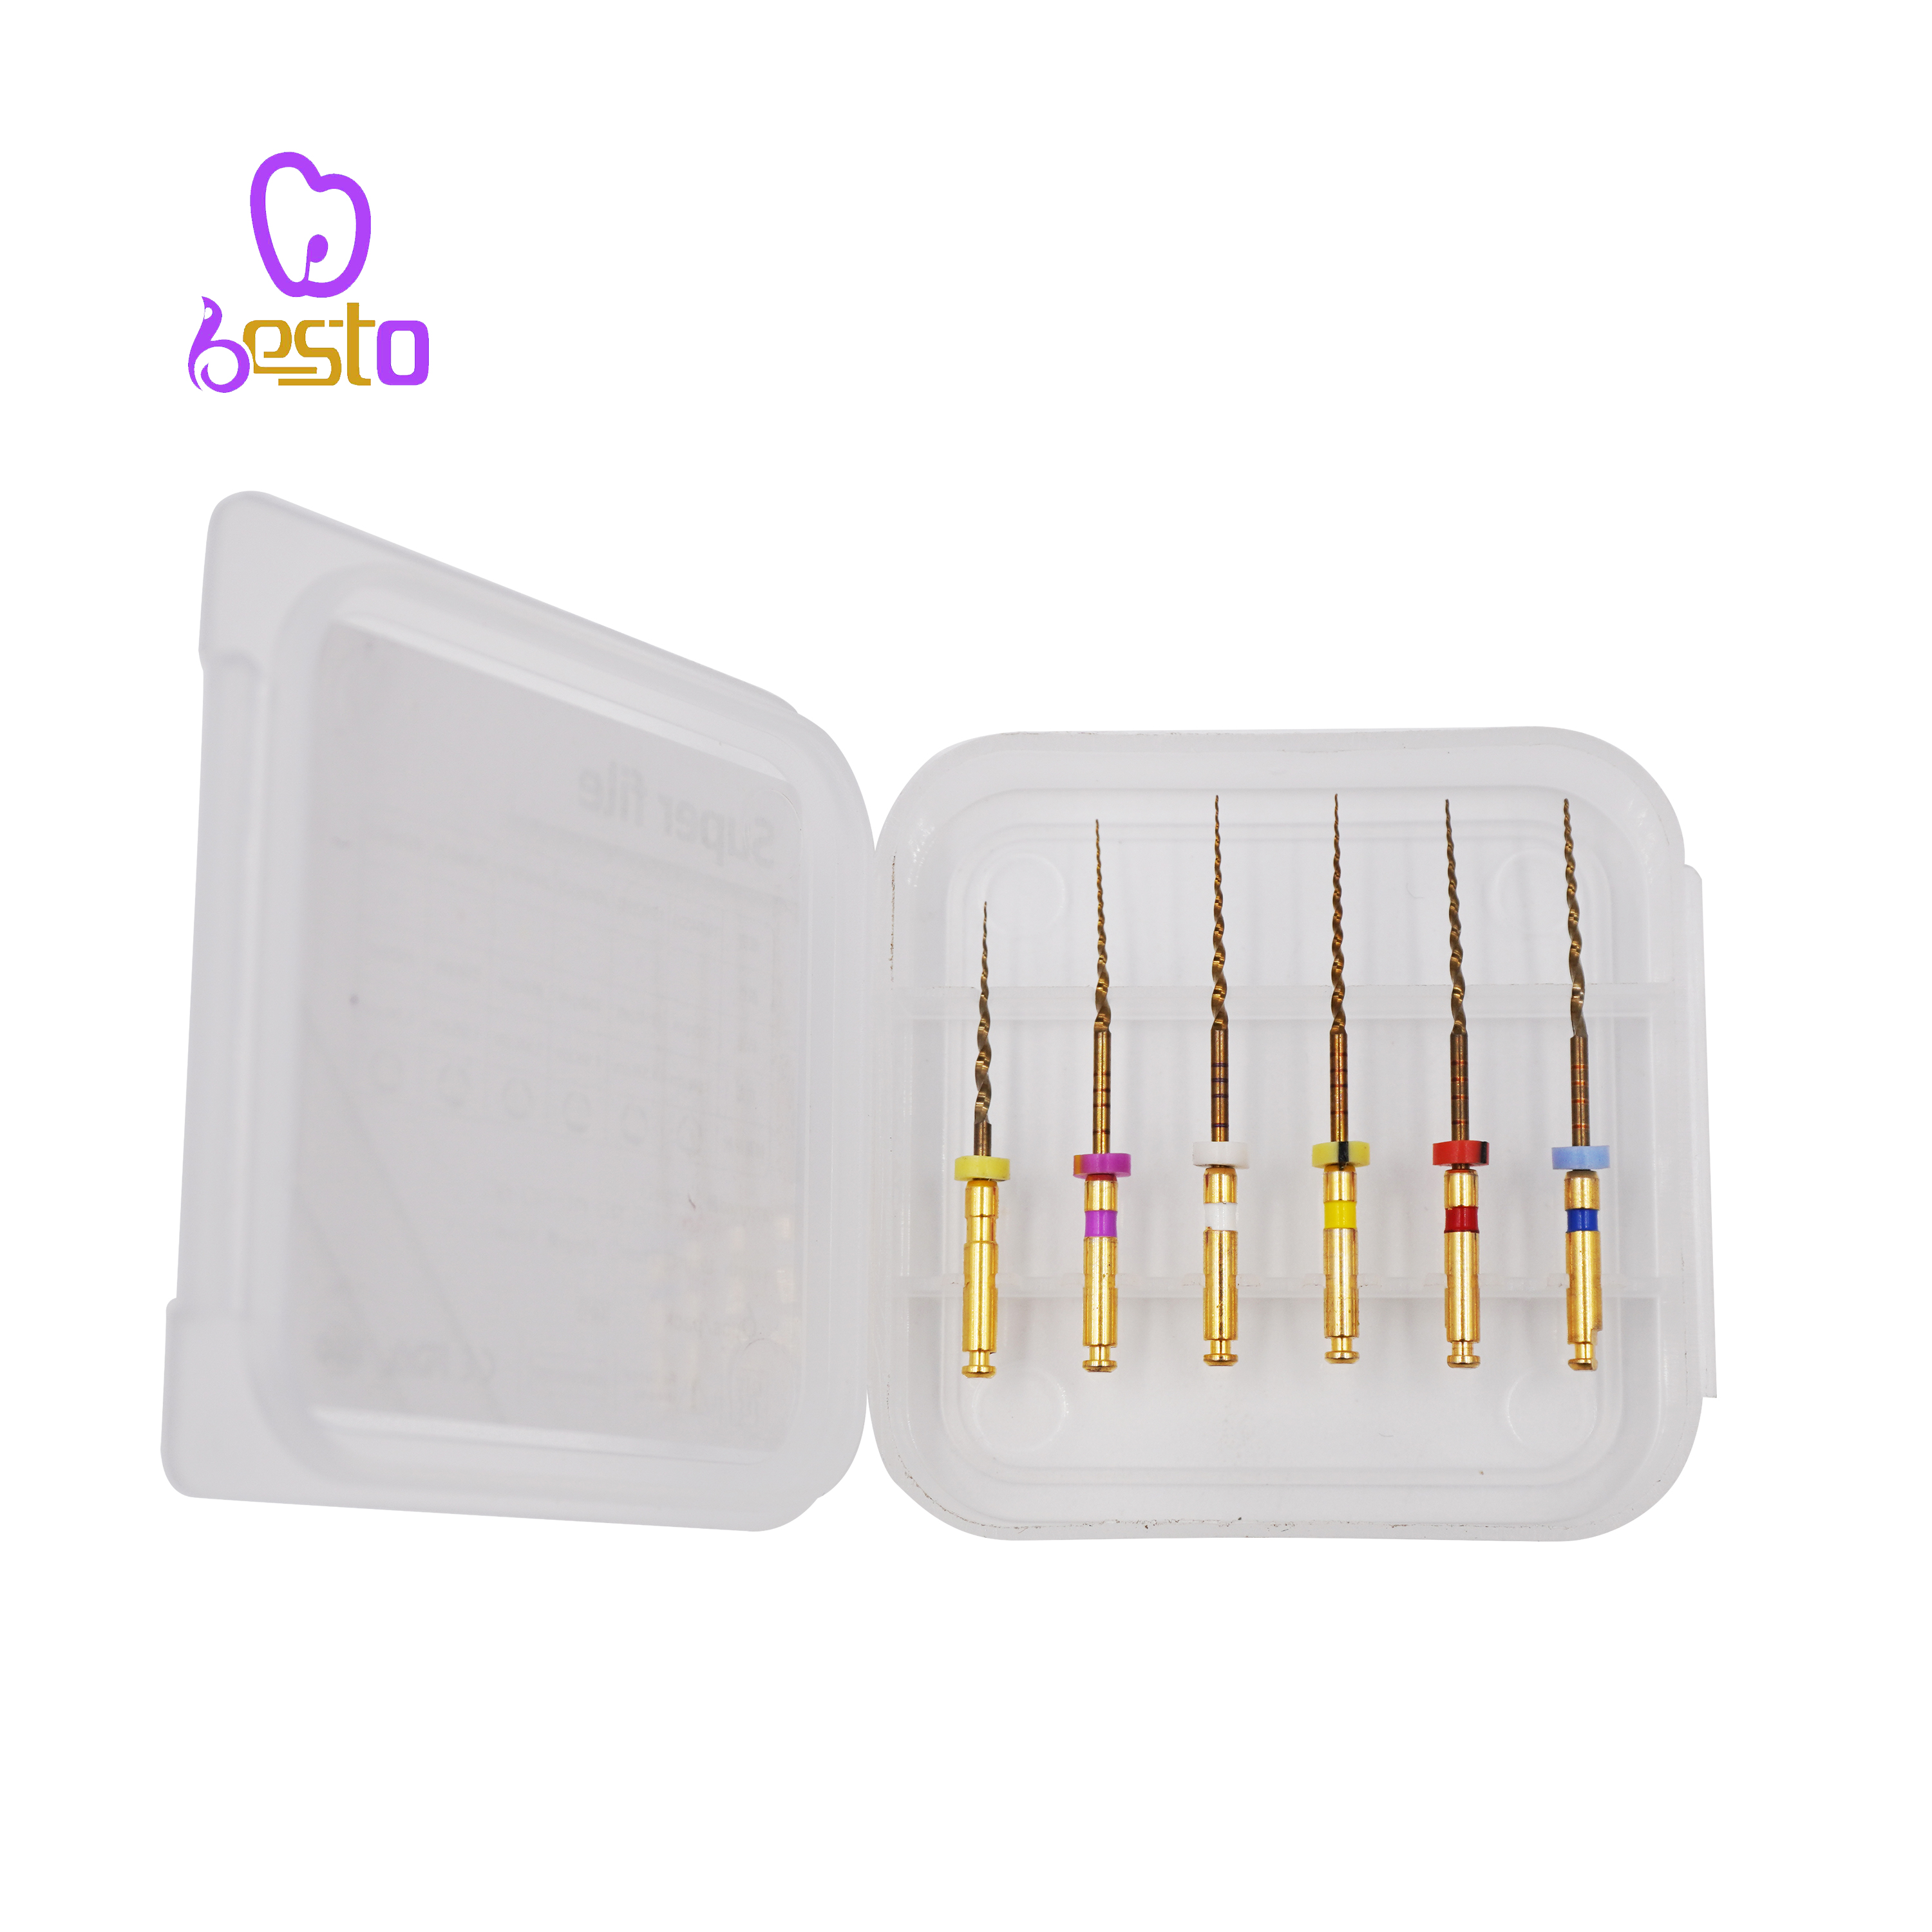 Dental Endodontic File Rotary File Root Canal Heat Activated Compatible With Densply System Dentist File